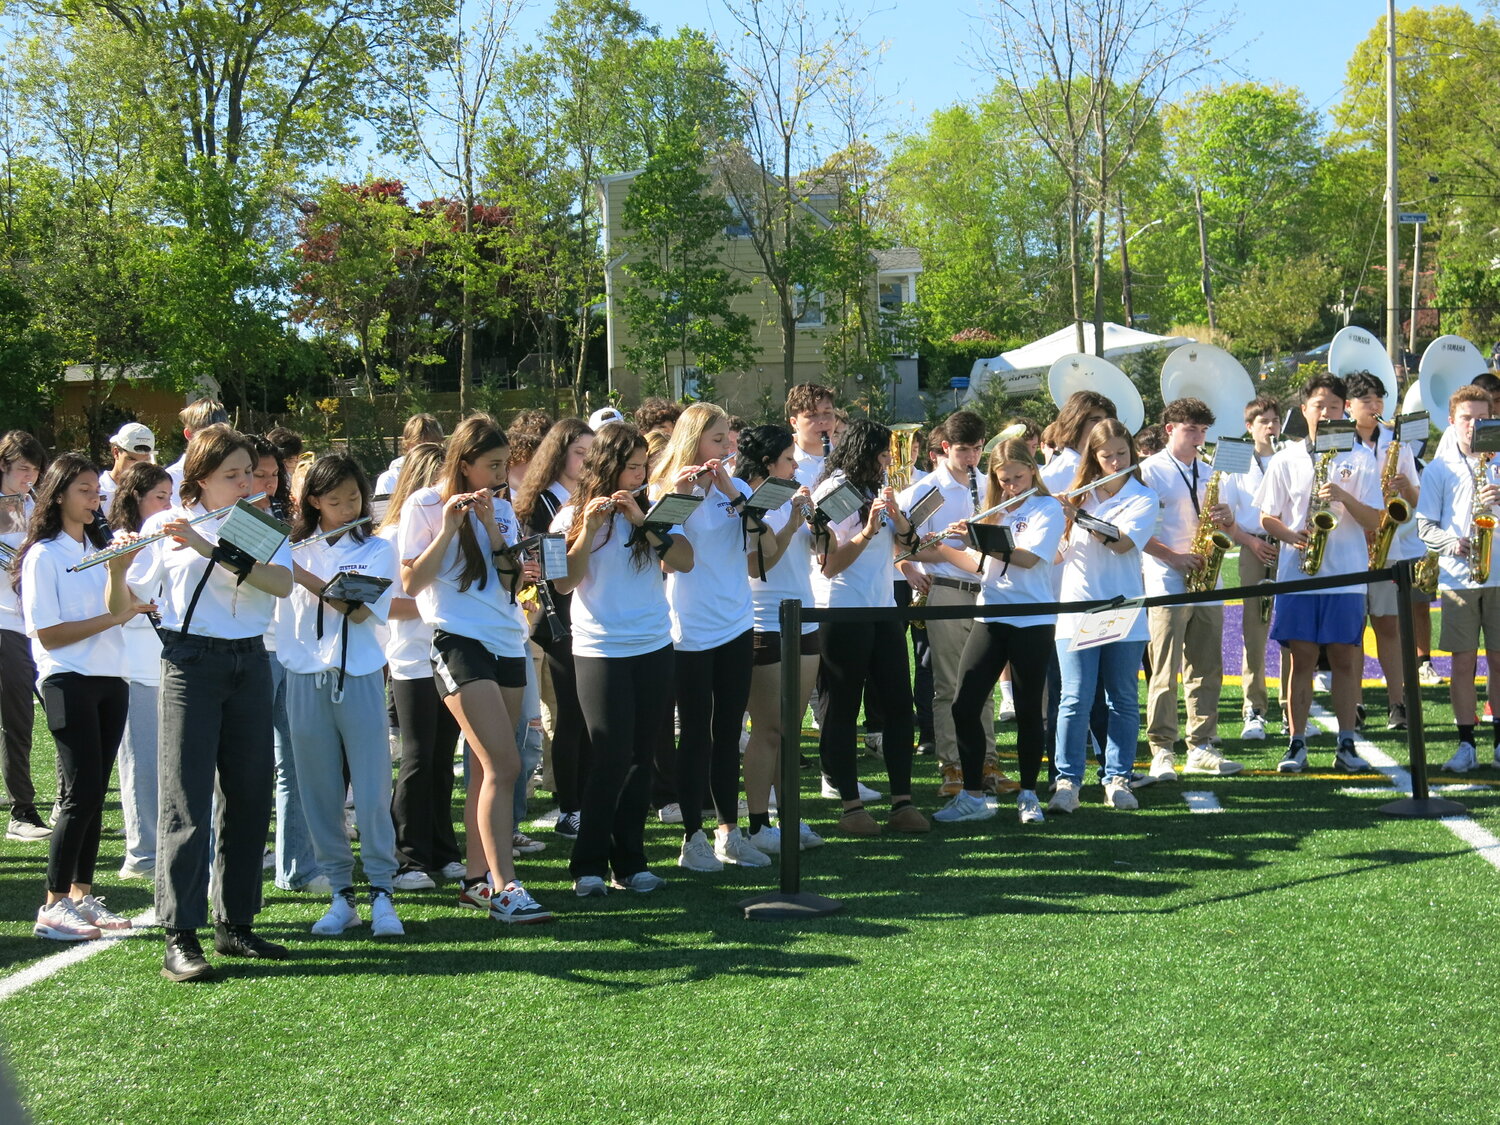 The Oyster Bay High School band performed at the May 6 ribbon-cutting ceremony for the new artificial-turf field.